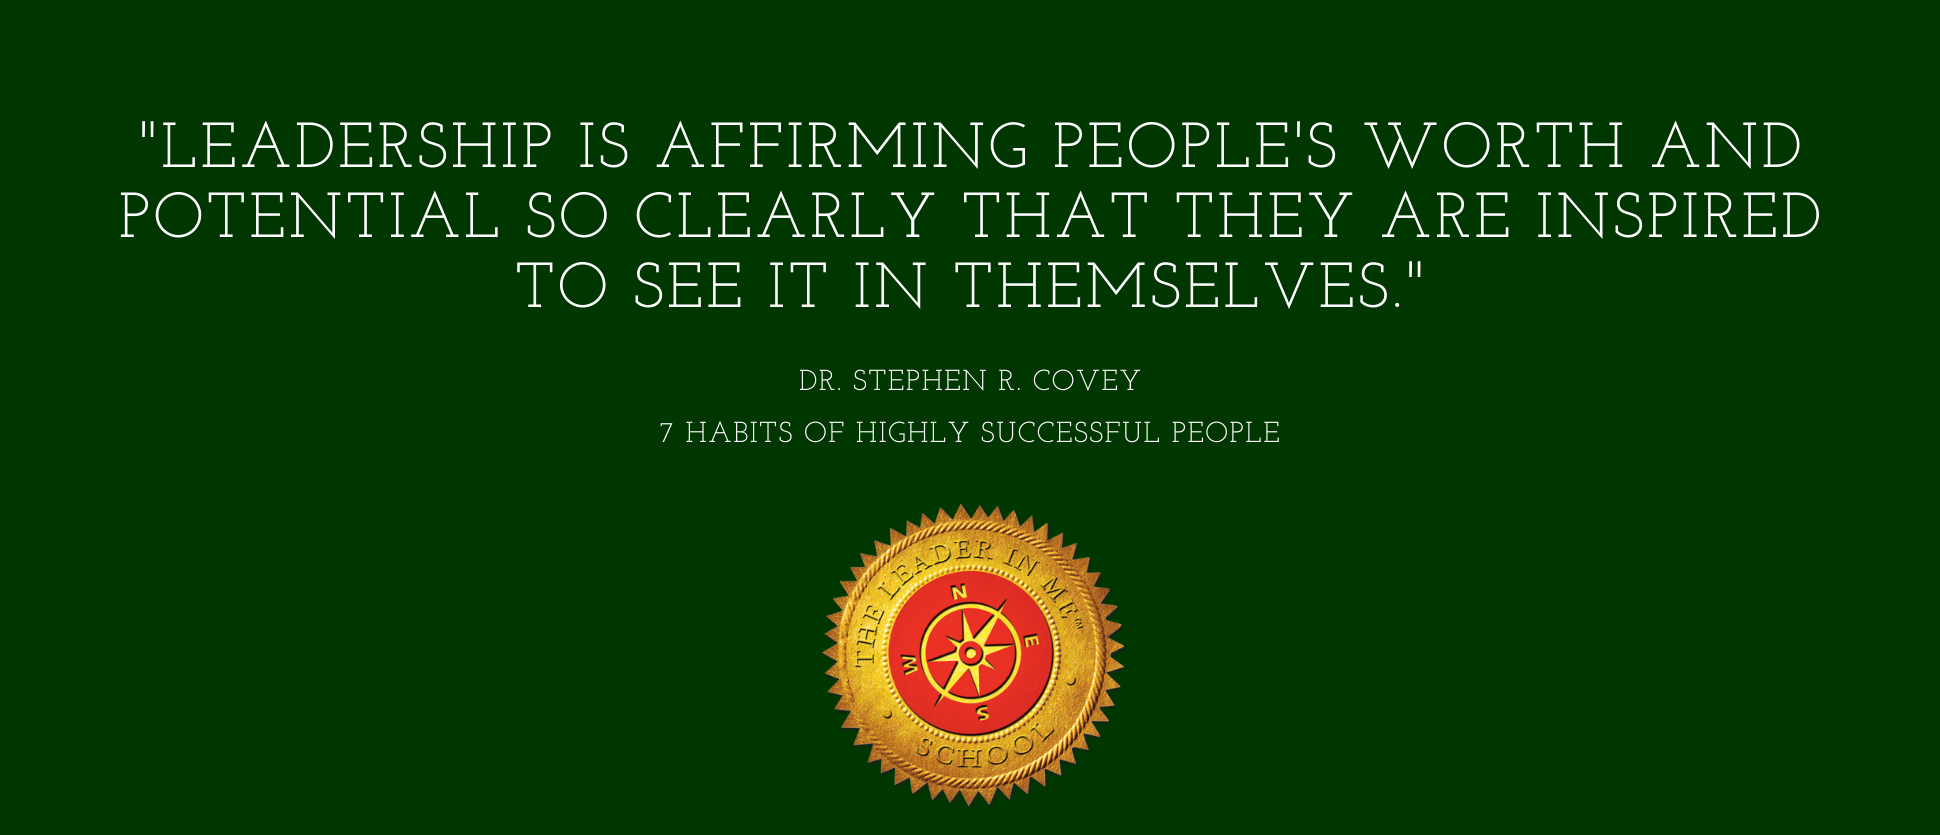 Franklin Covey 7 Habits of Highly Effective People Quote